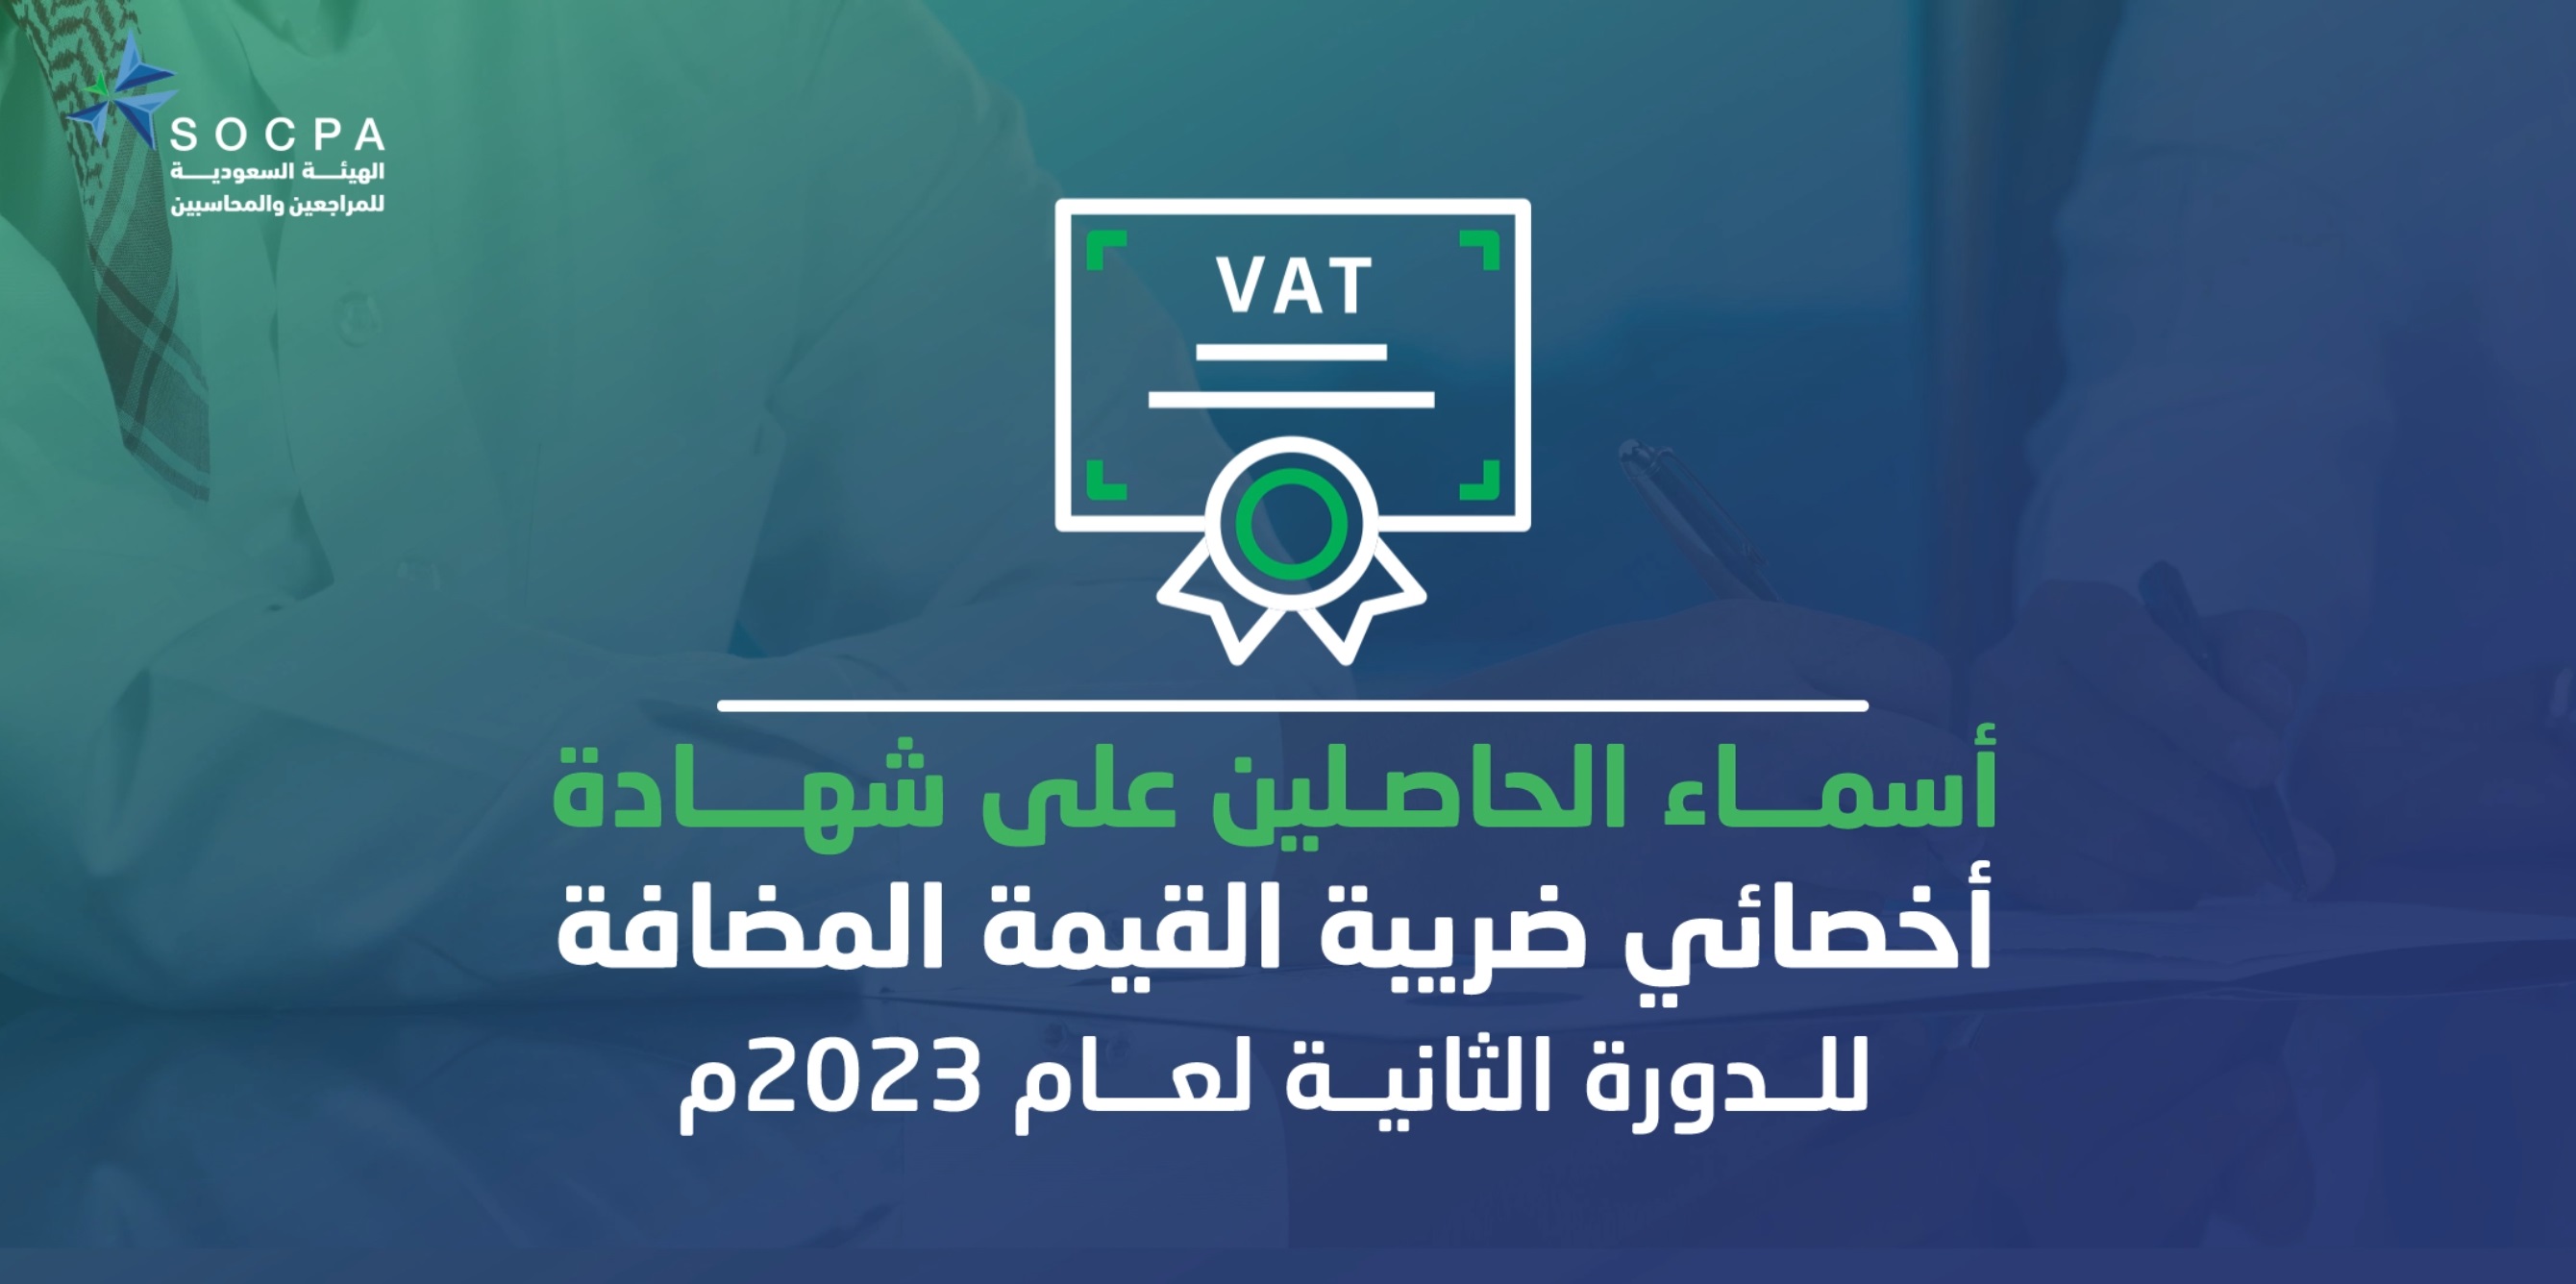 SOCPA Announces the Names of Recently Certified VAT Specialists